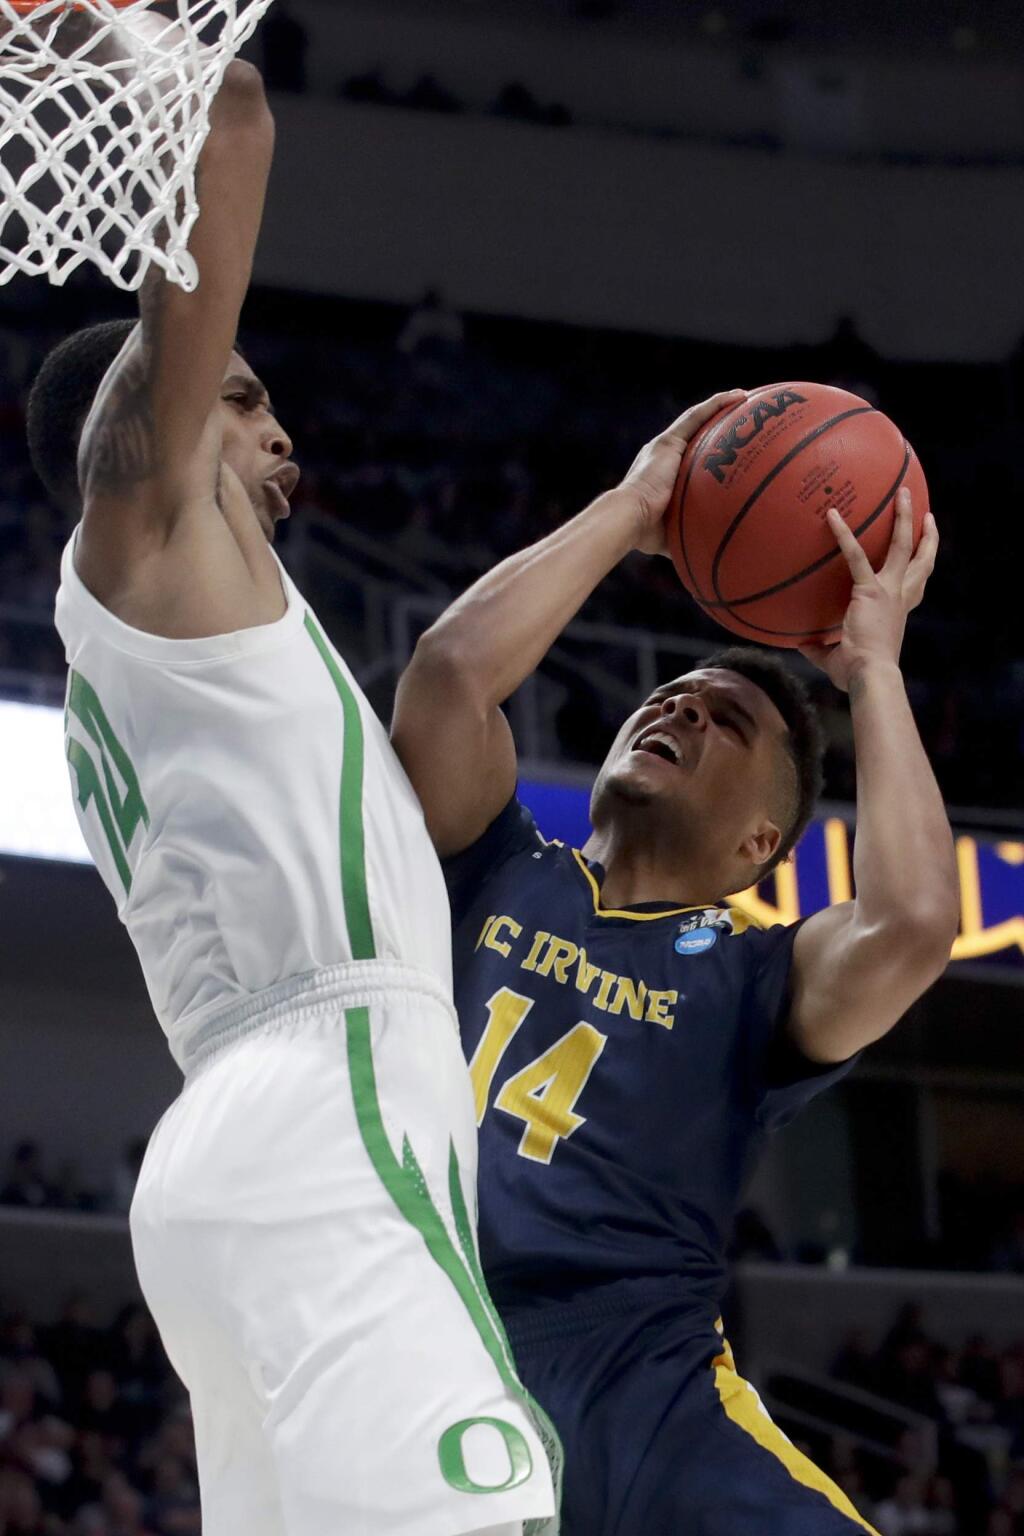 UC Irvine guard Evan Leonard, right, looks to shoot past Oregon forward Kenny Wooten during the second half of a second-round game in the NCAA men's college basketball tournament Sunday, March 24, 2019, in San Jose, Calif. (AP Photo/Jeff Chiu)